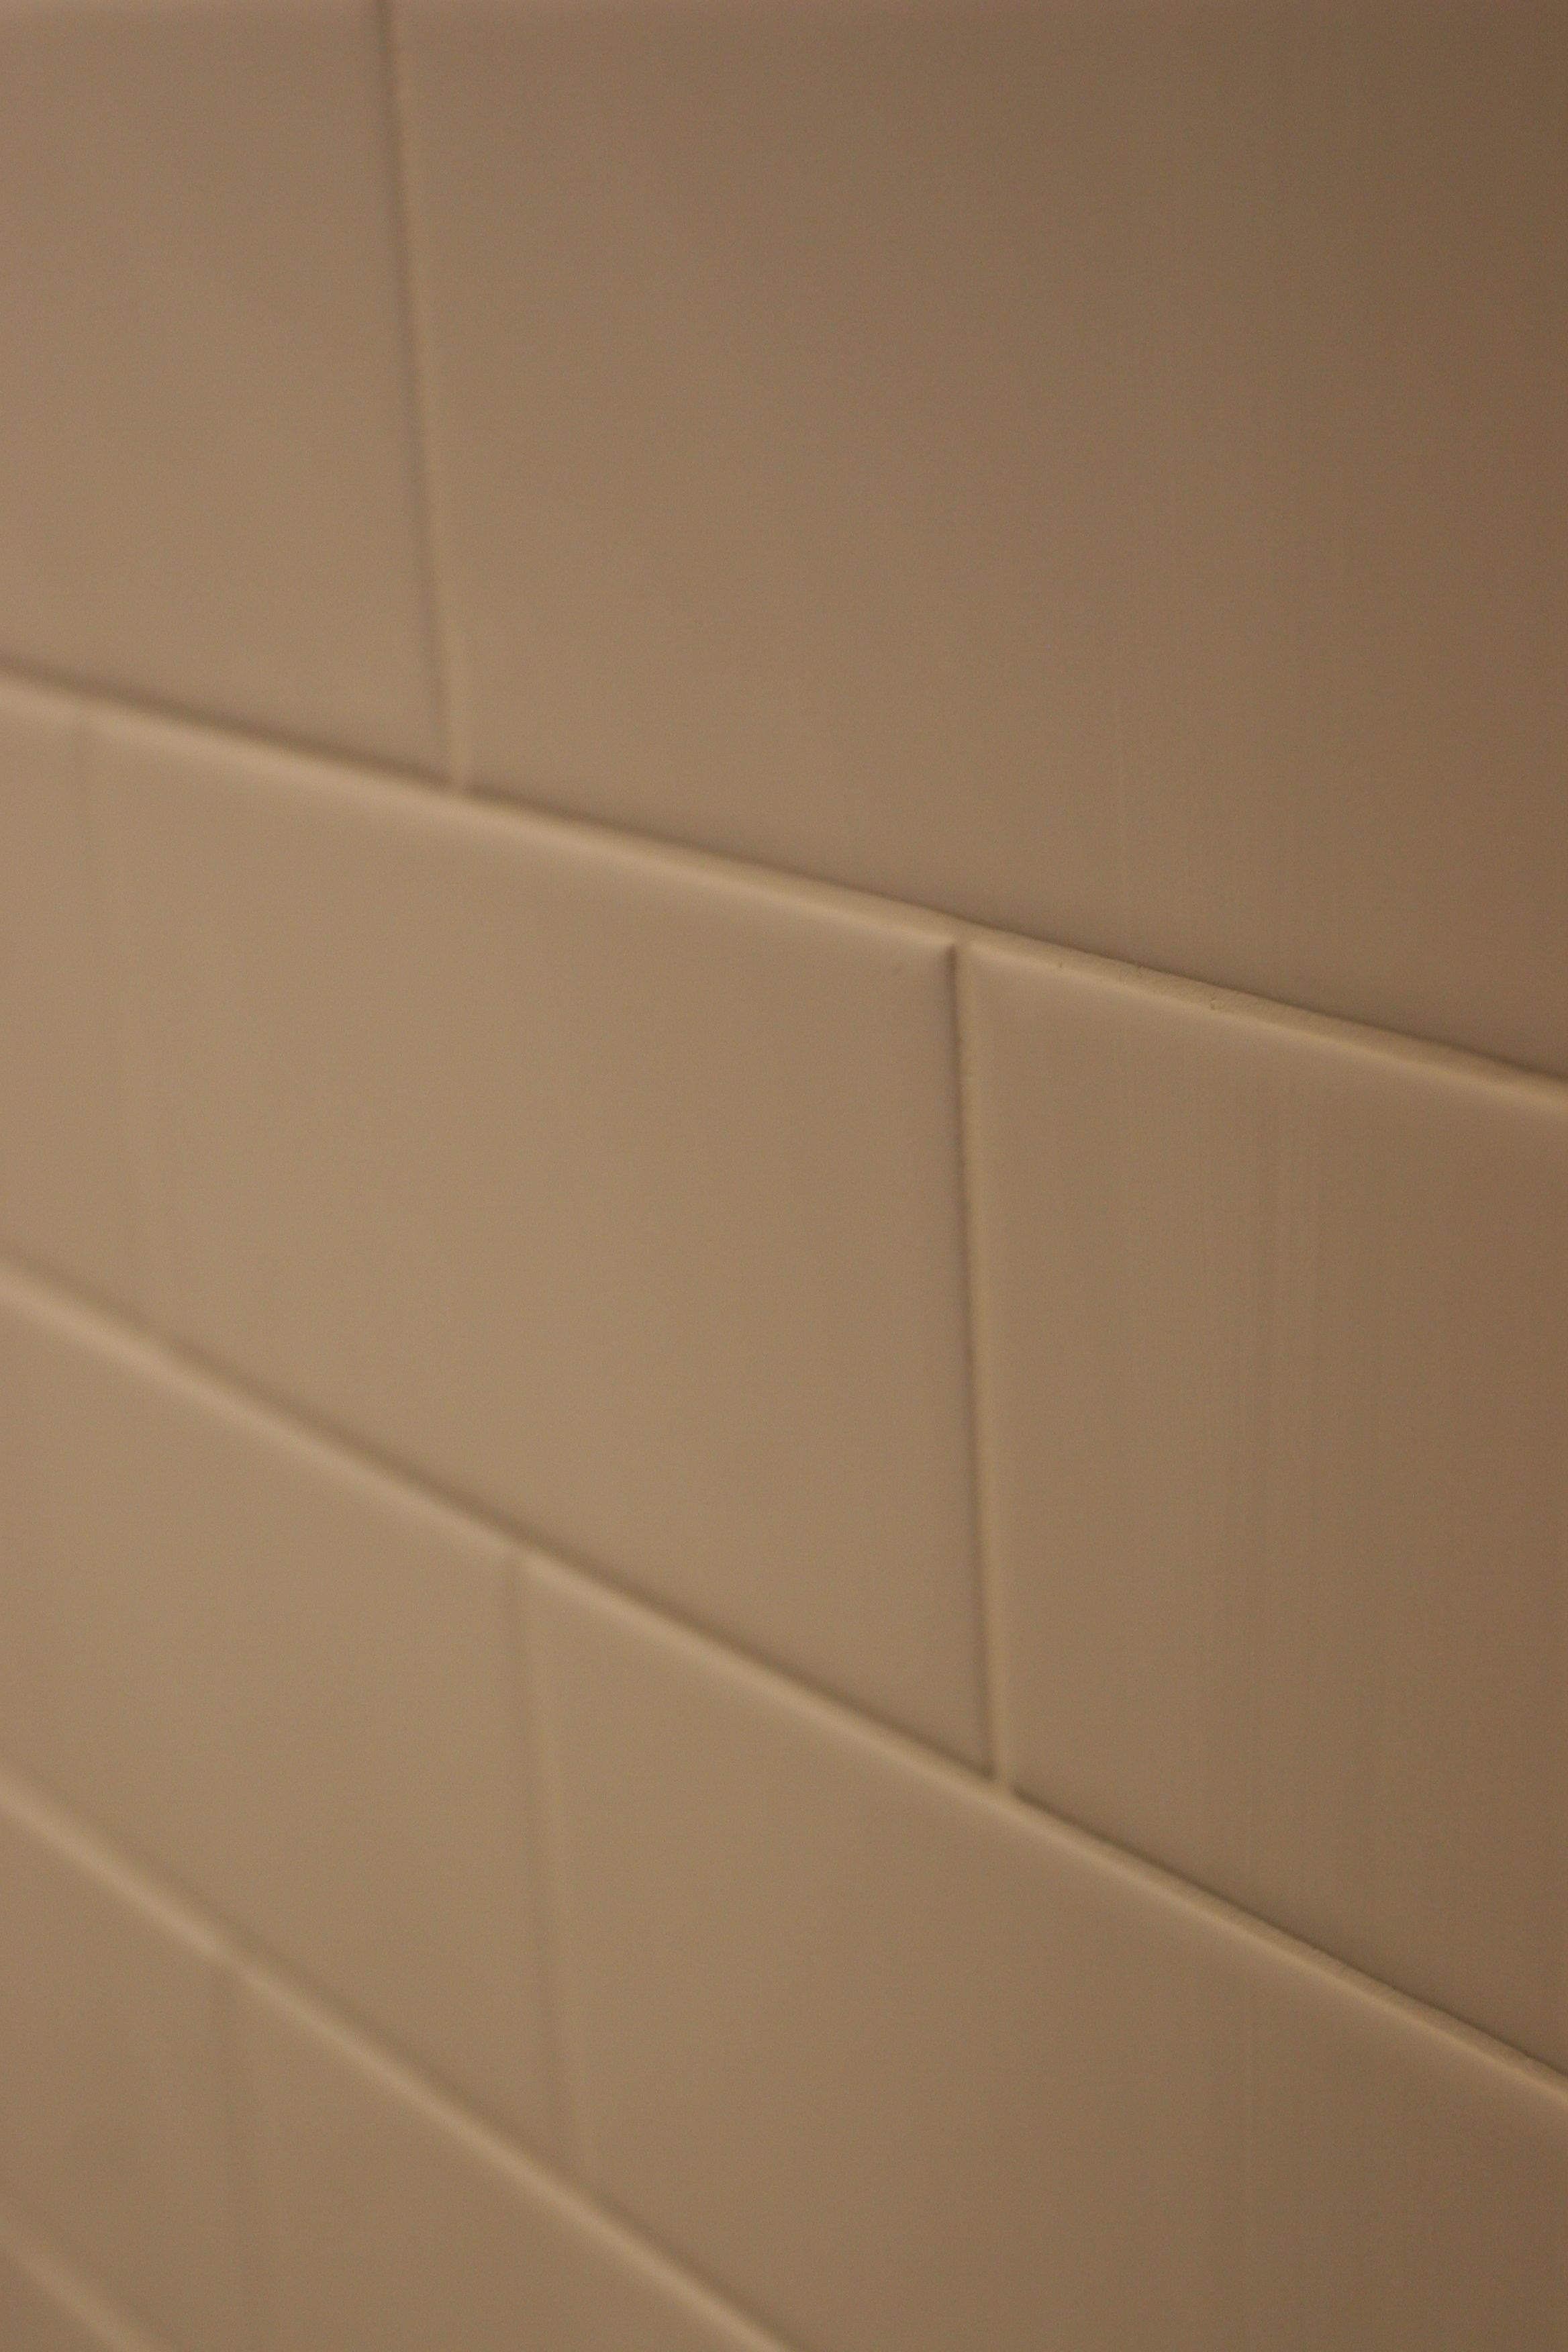 Clean, neat, smooth. Just as subway tile should be.